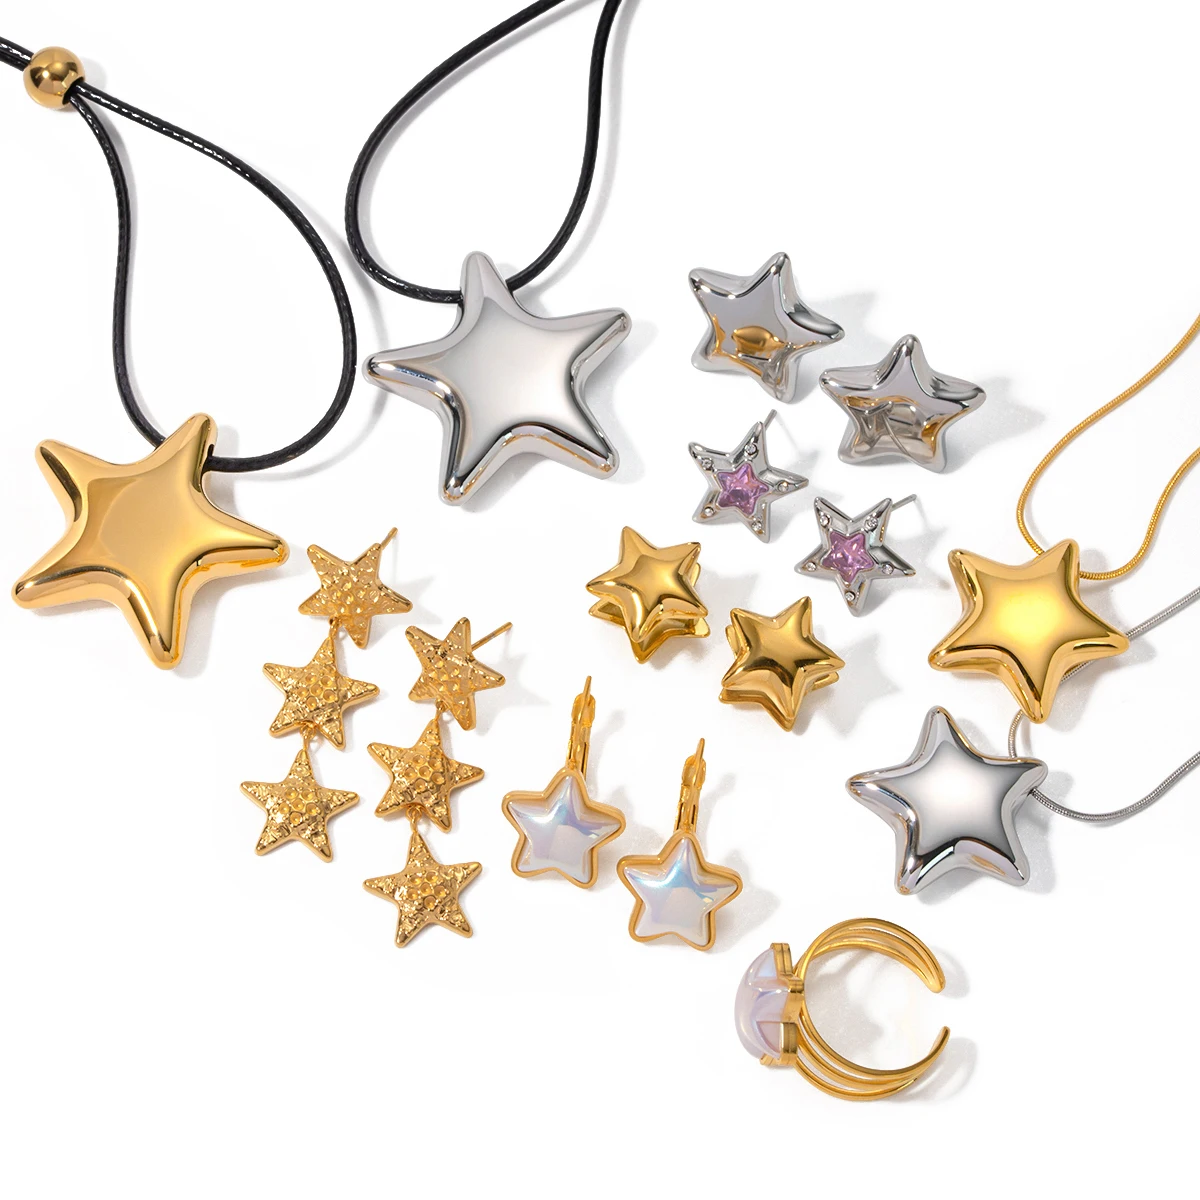 

J&D Hot Sale 18K Gold PVD Waterproof Stainless Steel Jewelry Chunky Star Pendant Necklace Earring Set